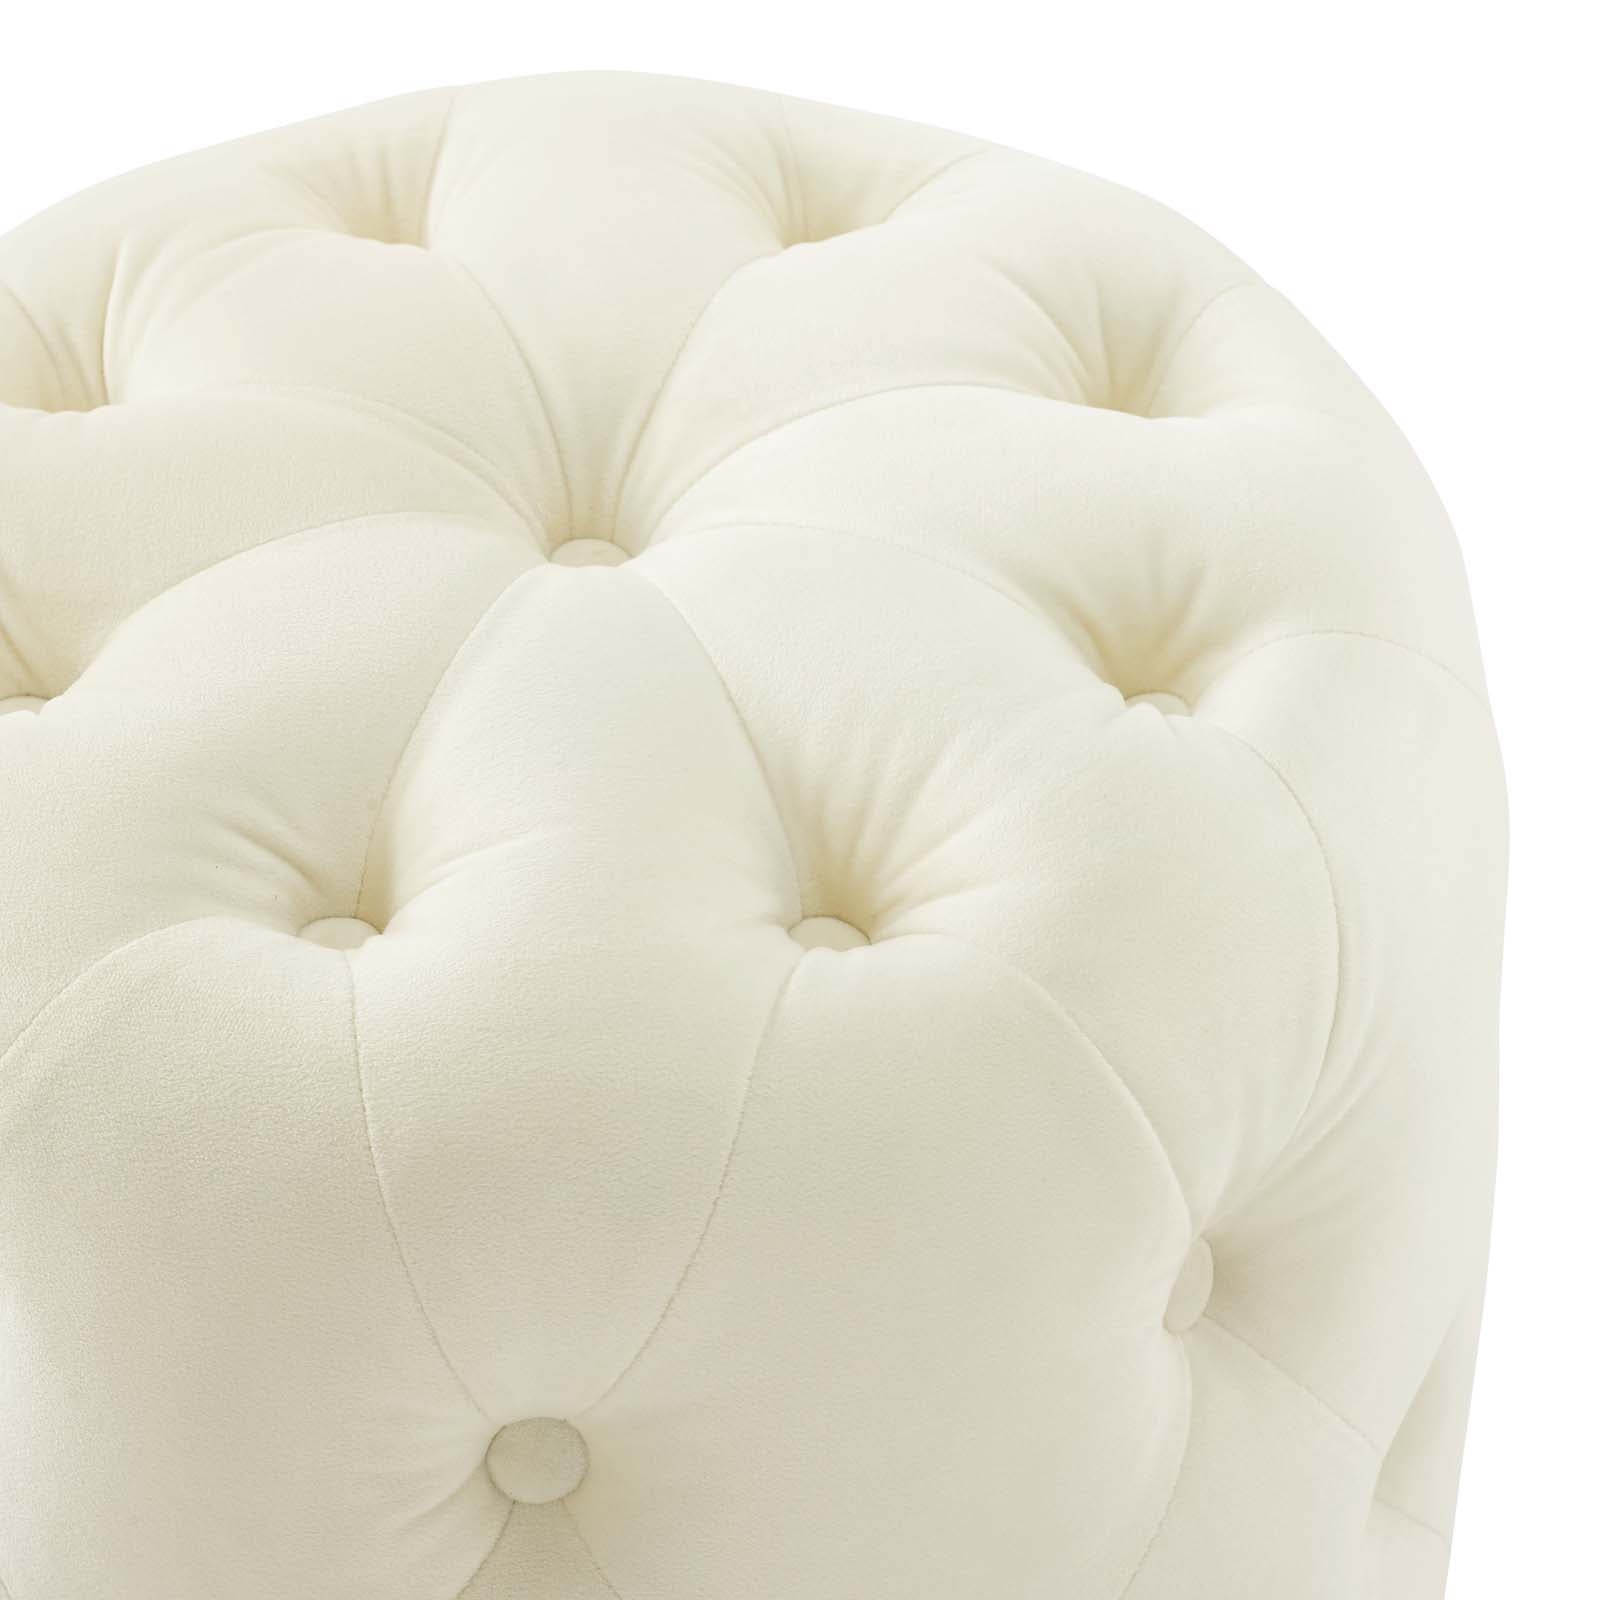 Amour Tufted Button Round Performance Velvet Ottoman - East Shore Modern Home Furnishings